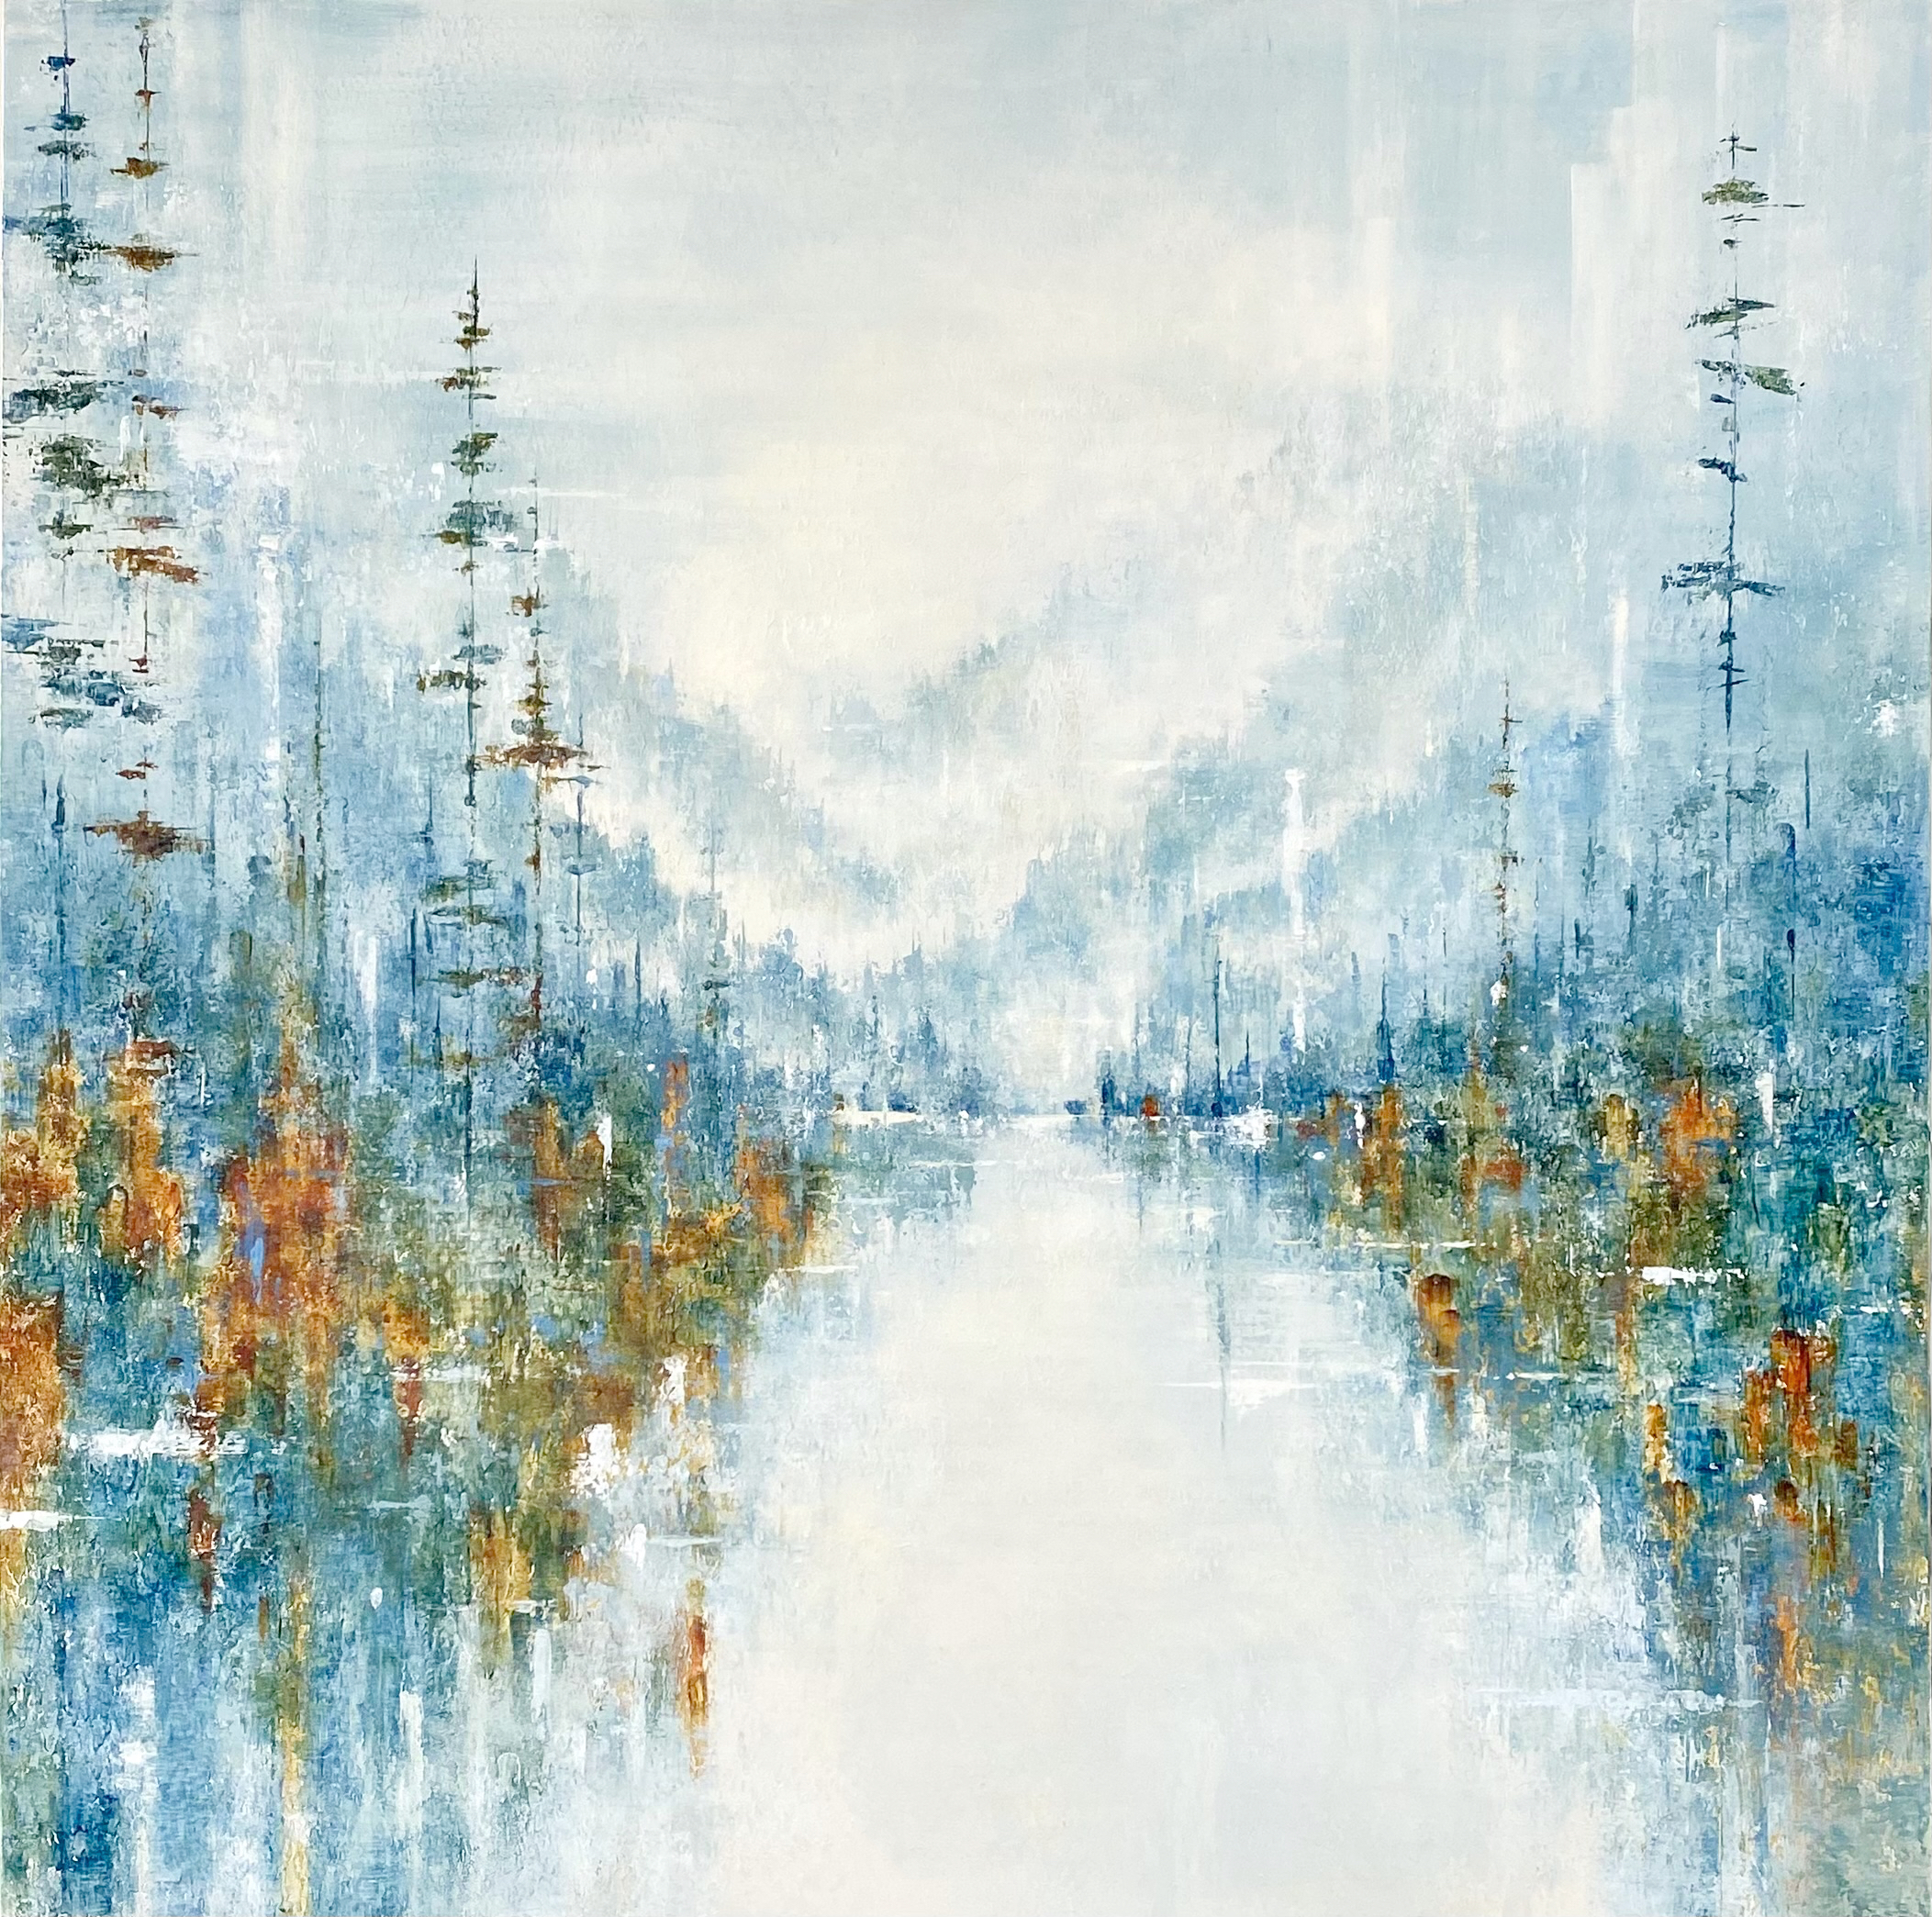 Dreamy soft mountain landscape painting by Gina Sarro of misty mountains and trees reflecting into a gentle lake.